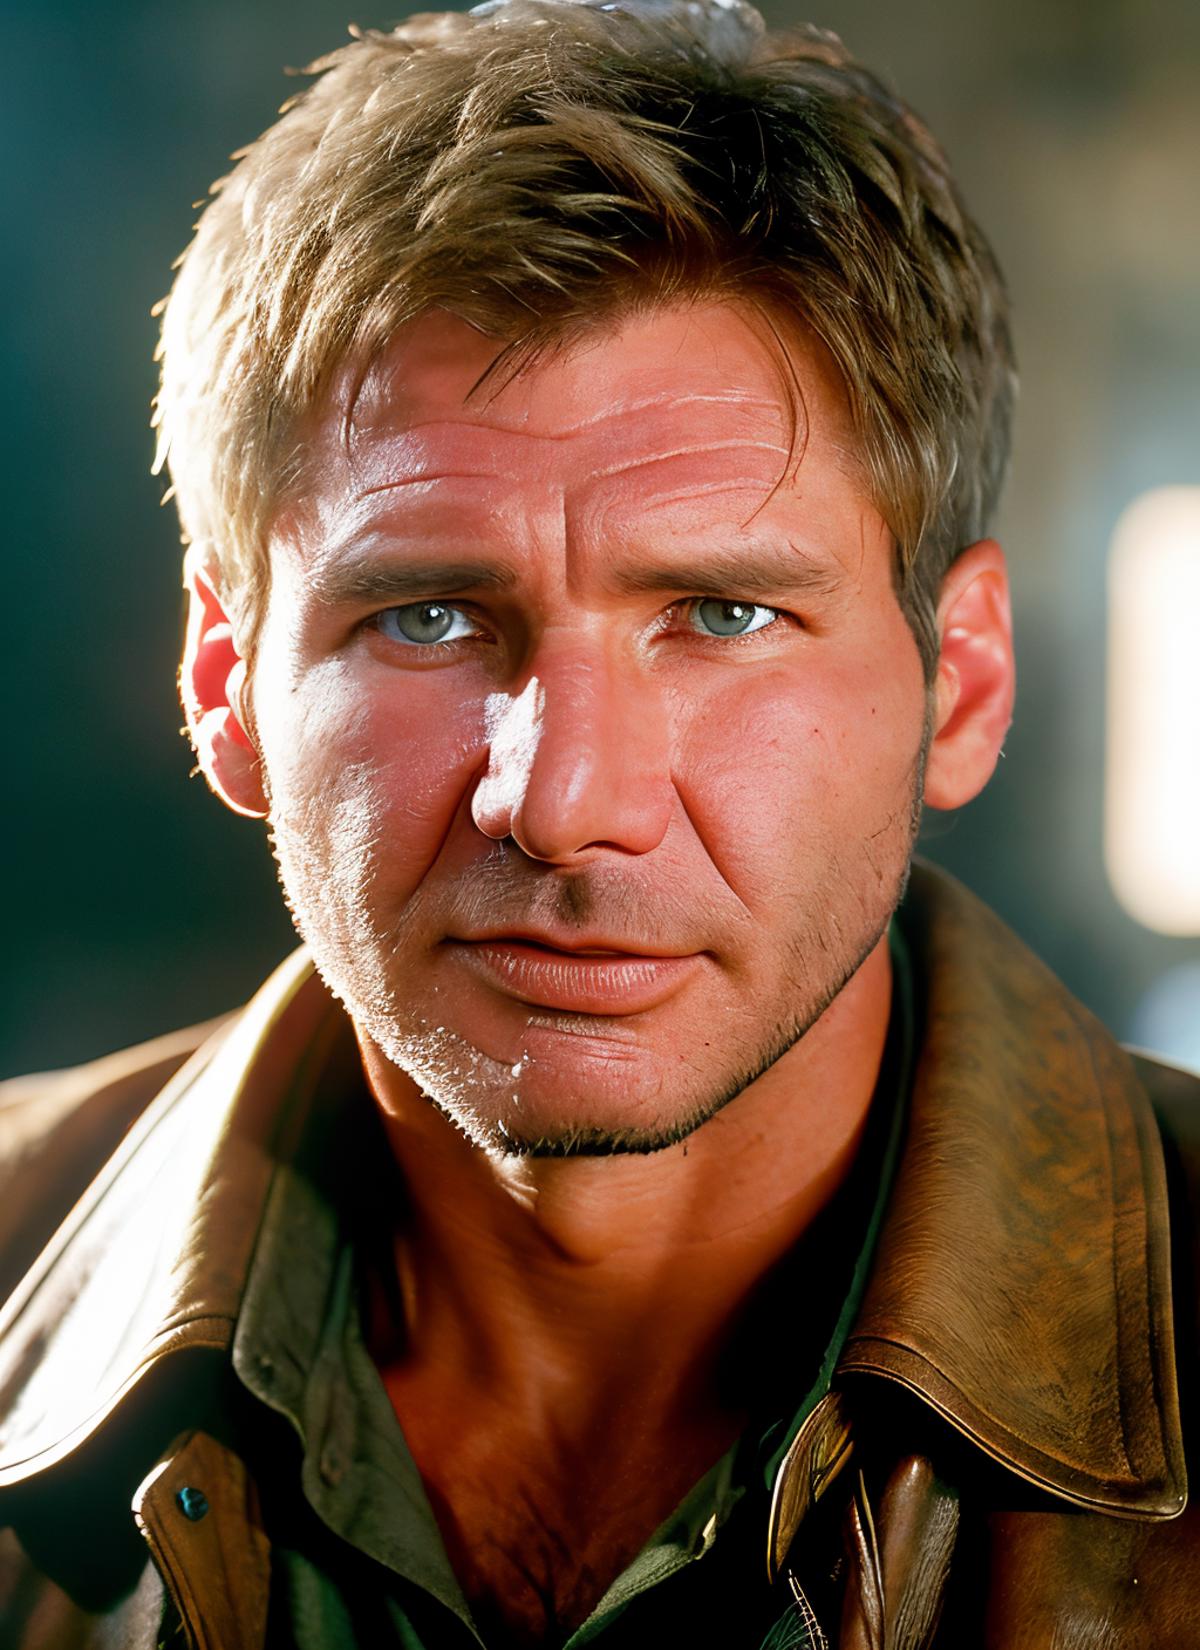 Harrison Ford (Indiana Jones, Blade Runner & Han Solo from Star Wars) image by astragartist